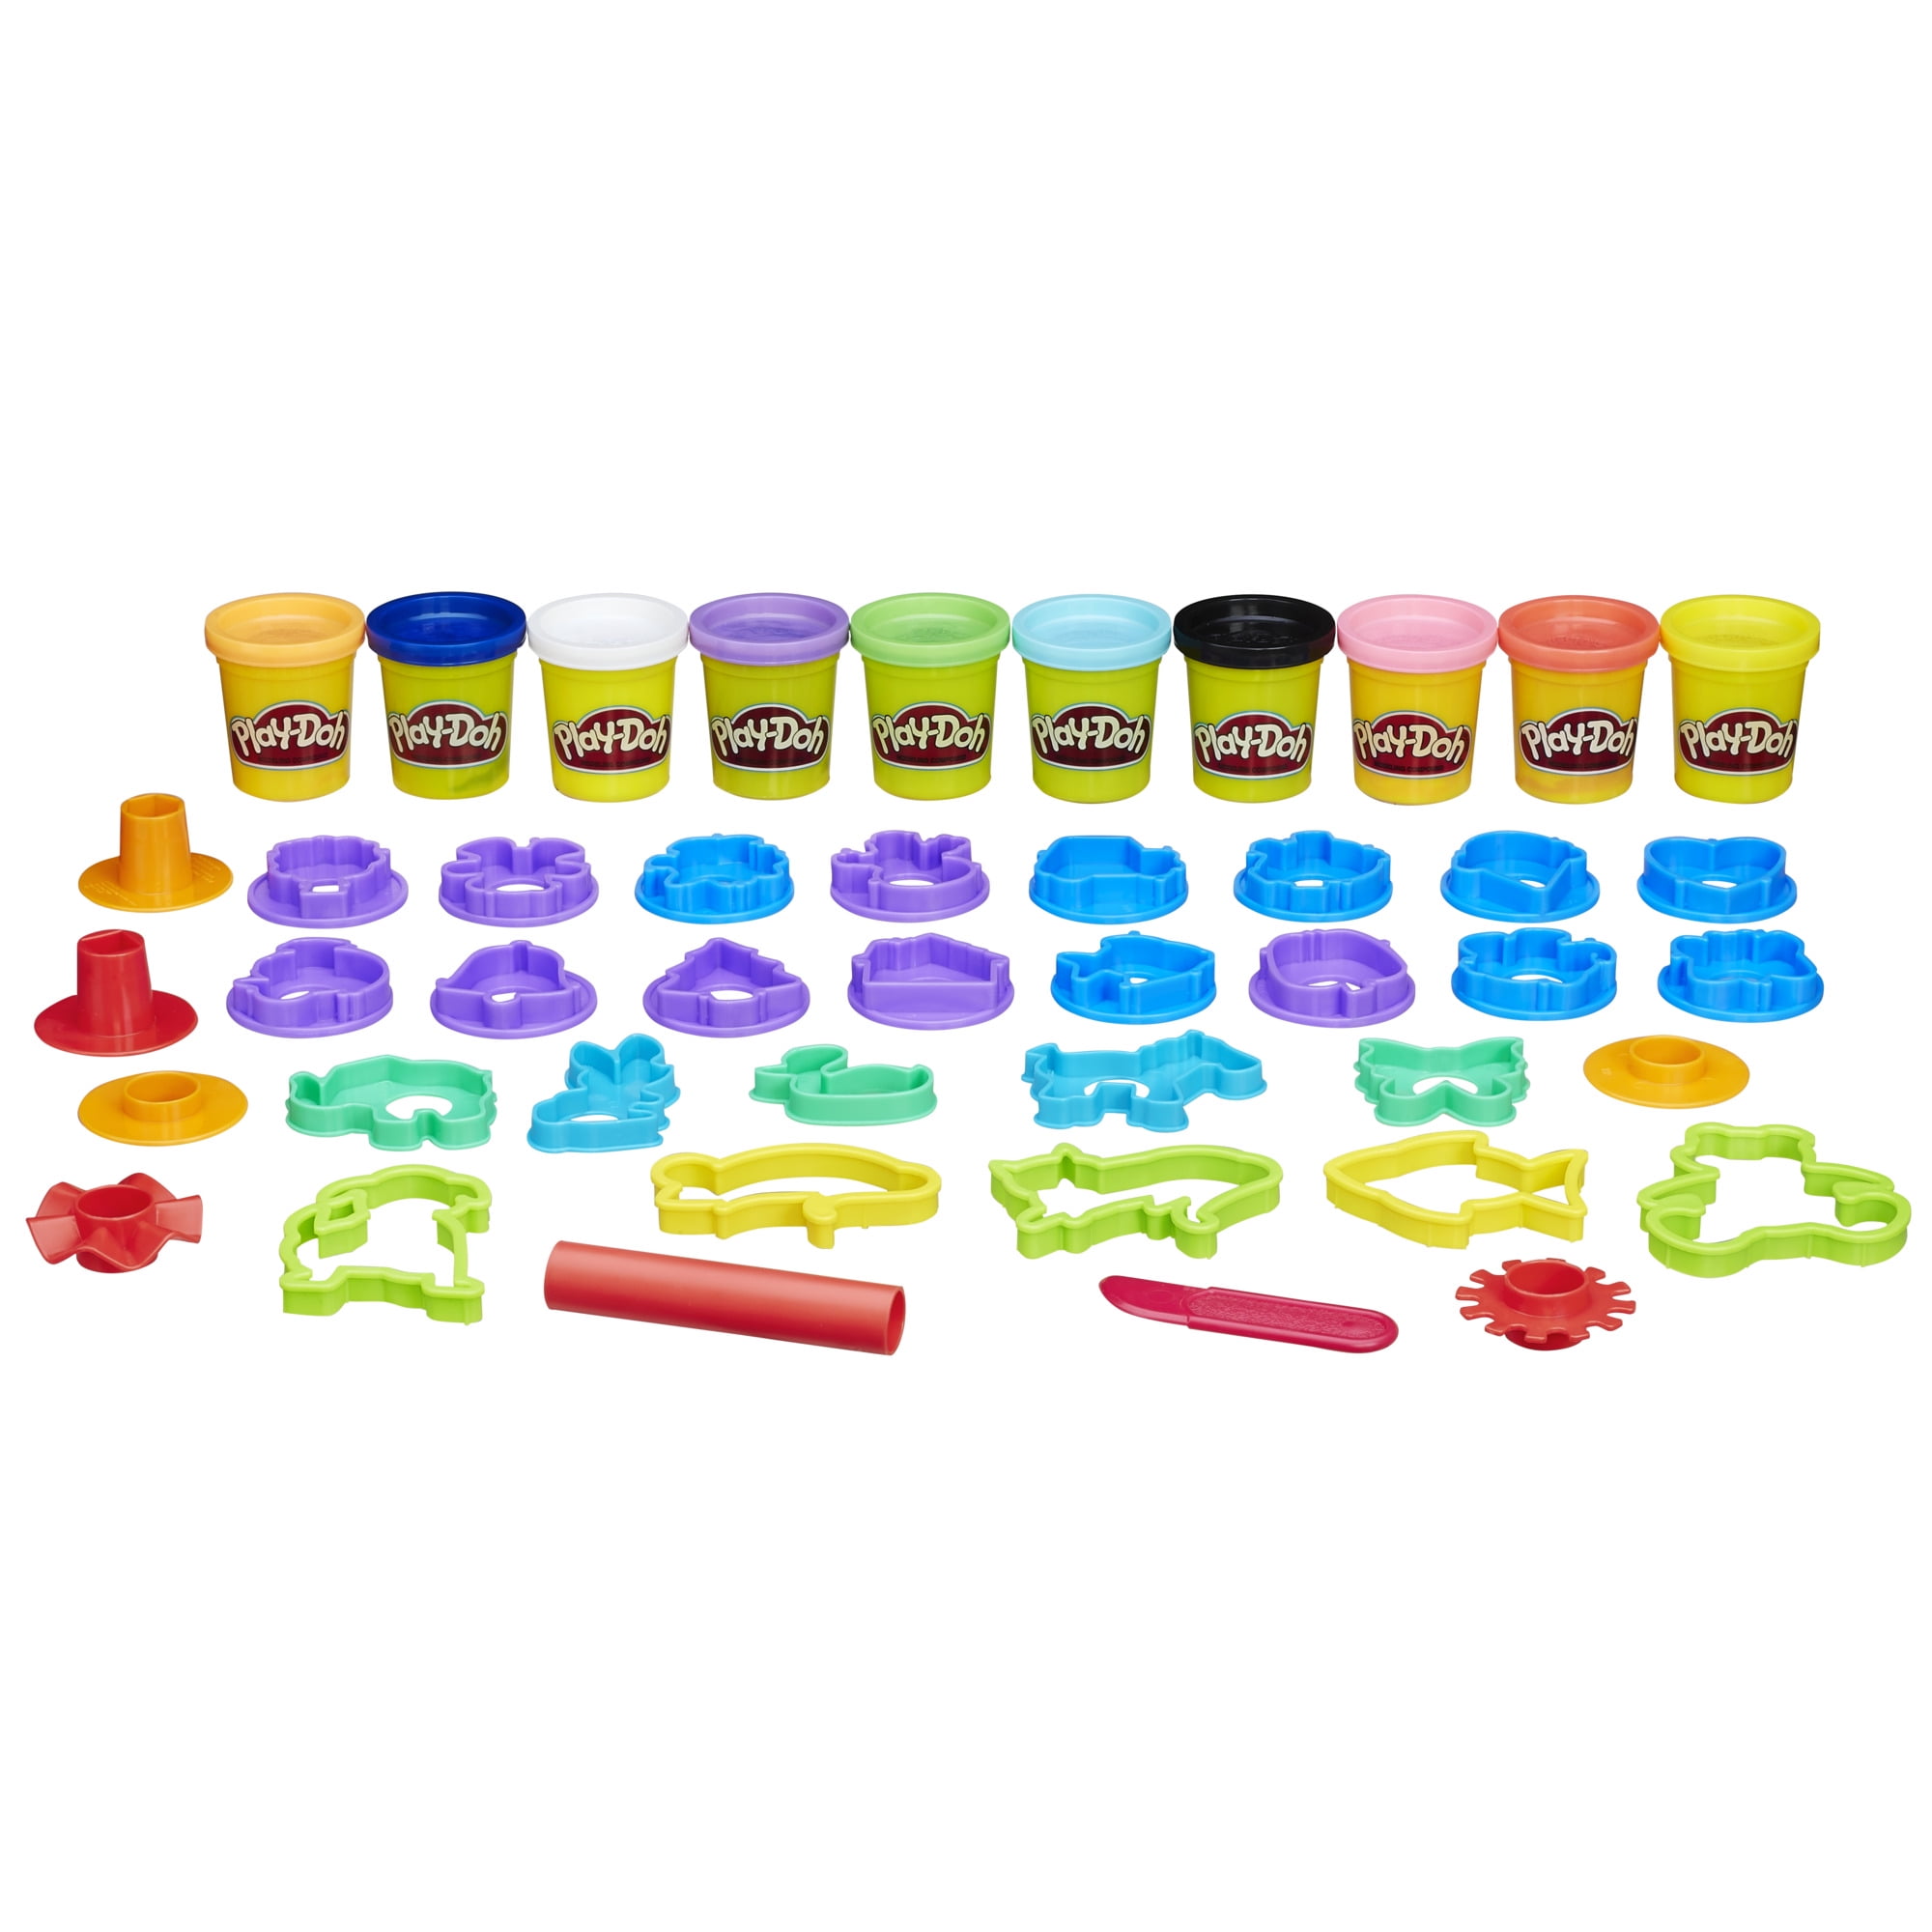 Wooden Stamping Kit for Play dough – ALT Retail